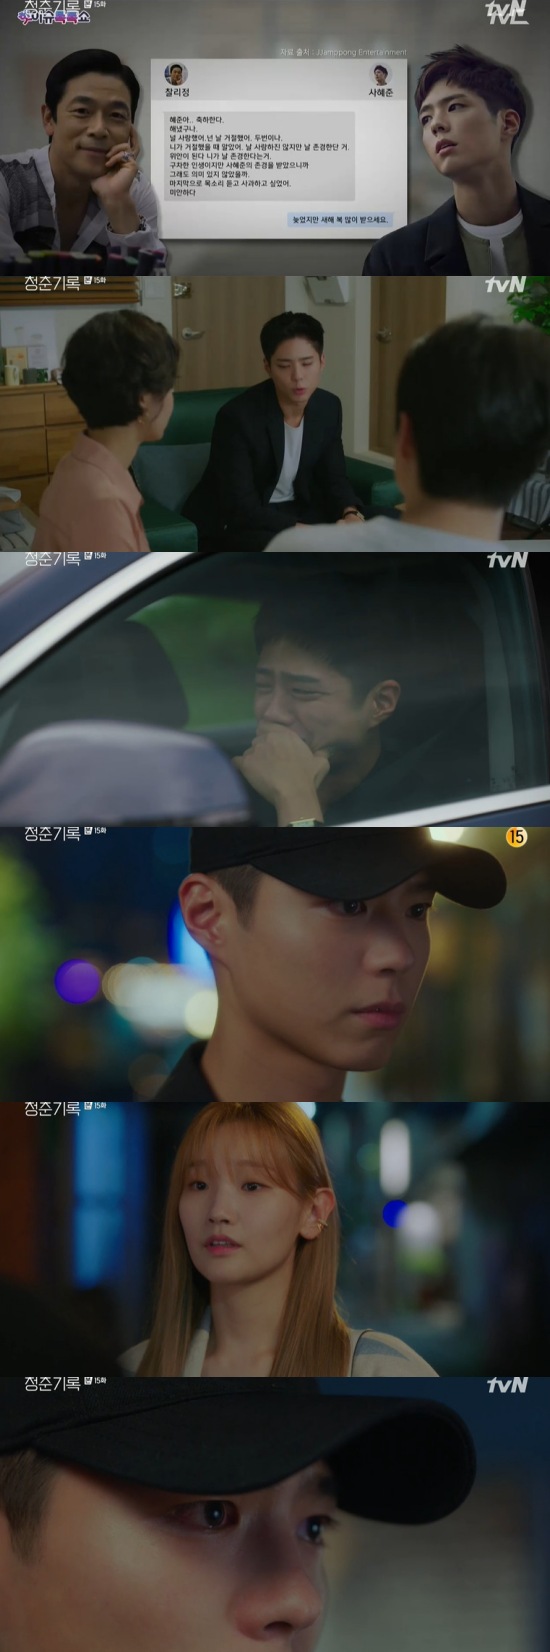 Record of Youth Park So-dam has notified Park Bo-gum of his farewellIn the 15th episode of TVNs monthly drama Record of Youth, which was broadcast on the 26th, Park So-dam was shown to have separated from Park Bo-gum.On this day, Kim Soo-man (Bae Yoon-kyung) visited An Jeong-ha without fail, and An Jeong-ha was forced to cancel his appointment with Sa Hye-joon.I talked with Kim Soo-man, who is stable, at a coffee shop, and Kim Soo-man asked, How long have you been with Sa Hye-joon?I have never been with you, said Ahn. Kim Soo-man, I was photographed from the house of Ahn Jung-ha.Sa Hye-joon is one of the entertainers who make up my makeup, and I have a common point that I am the same age, so I felt like a friend.In particular, Kim Soo-man said, Did you change after Mr. Sahyejun came up? And asked, What is the reason for making me a abandoned woman?Kim Soo-man said, Jeong Ji-a, when I interviewed him, I did not forget Mr. Sa Hye-joon.If the two of them continue, everyone around them will be welcomed, he said, using Jeong Ji-a (Sul In-ah).I think you have a good interview technique, and you are upset enough and you want to say something bad about Mr. Sa Hye-joon.Lee Min-jae (Shin Dong-mi) also refuted the rumors that Kim Soo-man broke out, while avoiding contact with Sa Hye-joon, who was stable, and Sa Hye-joon later confirmed the refutation article and met Lee Min-jae.Lee Min-jae insisted that it was Choices to protect Sa Hye-joon, and Sa Hye-joon said that it was first to keep stable.In addition, an article reported that the dramas ratings were falling due to the number of rumors of Sa Hye-joon.I can change the situation, he said, persuading him to release the text sent by Charlie Chung (Lee Seung-jun).I can still endure it, I will rest after this work, said Sa Hye-joon. I did not rest even if I rested. There are many works that came in.Sa Hye-joon decided, No.In the end, he informed Sa Hye-joon, who was stable, that he was I love you, we should break up.I was embarrassed, and I was stabilized, Remember that I would never say Im sorry if I love you, do you know how many times I said Im sorry when I met you? Sa Hye-joon apologized, saying, Im sorry, and stable Every time you say that, I do not know why you think its hard first.I know that Sa Hye-joon is a person who keeps what he says. I will not do it anymore. I will go back to my daily life before I love you. In addition, Lee Min-jae released a text message sent to Sa Hye-joon by Charlie Jung. Lee Min-jae confessed, Ive been in an accident, I know you will not let me tell you beforehand.Sa Hye-joon was insulted by netizens, and said, If you break down and refute, it is not organized, but there is another controversy.Lee Min-jae suggested, I thought these Choices were the best, we were still in the pre-resignation period, Ill accept whatever Choices youre doing.Sa Hye-joon missed the stable and was alone. That night, Sa Hye-joon waited in front of the store of the stable, and raised the tension of the drama, saying, I can not break up with you.Photo = TVN broadcast screen